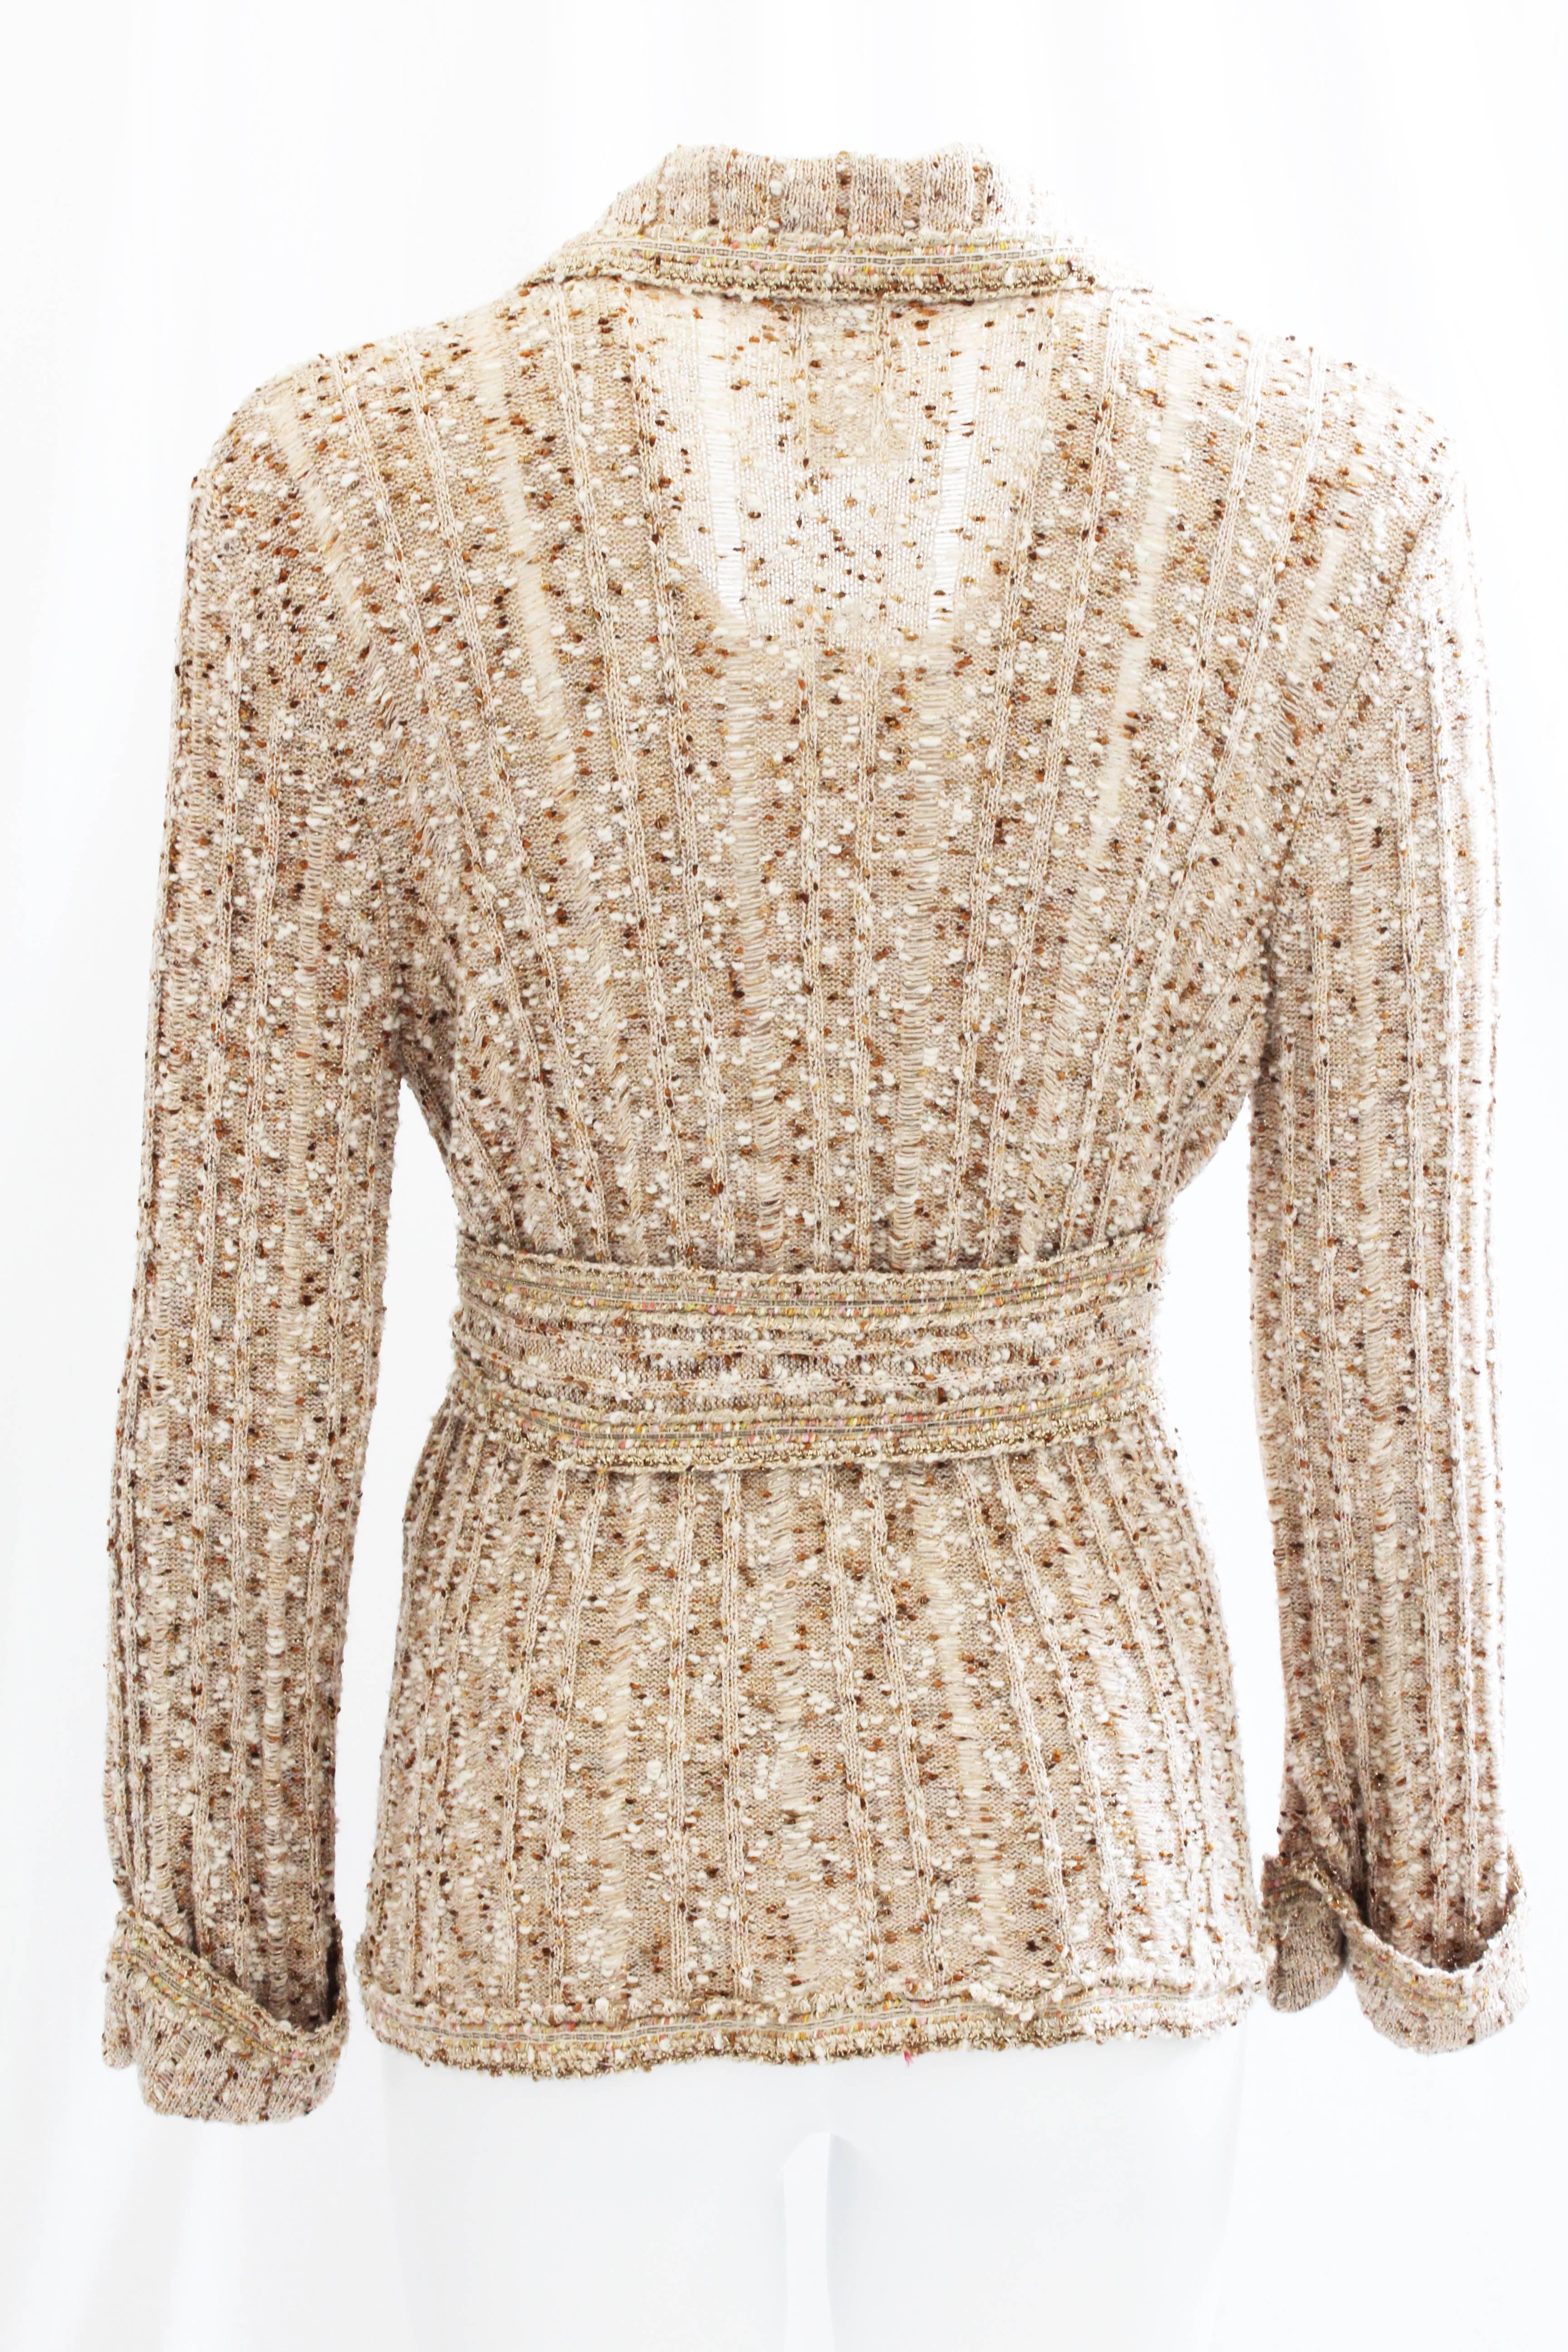 Chanel Boucle Knit Cardigan Sweater with Belt Oatmeal Tan 06P Collection Sz 44 In Good Condition In Port Saint Lucie, FL